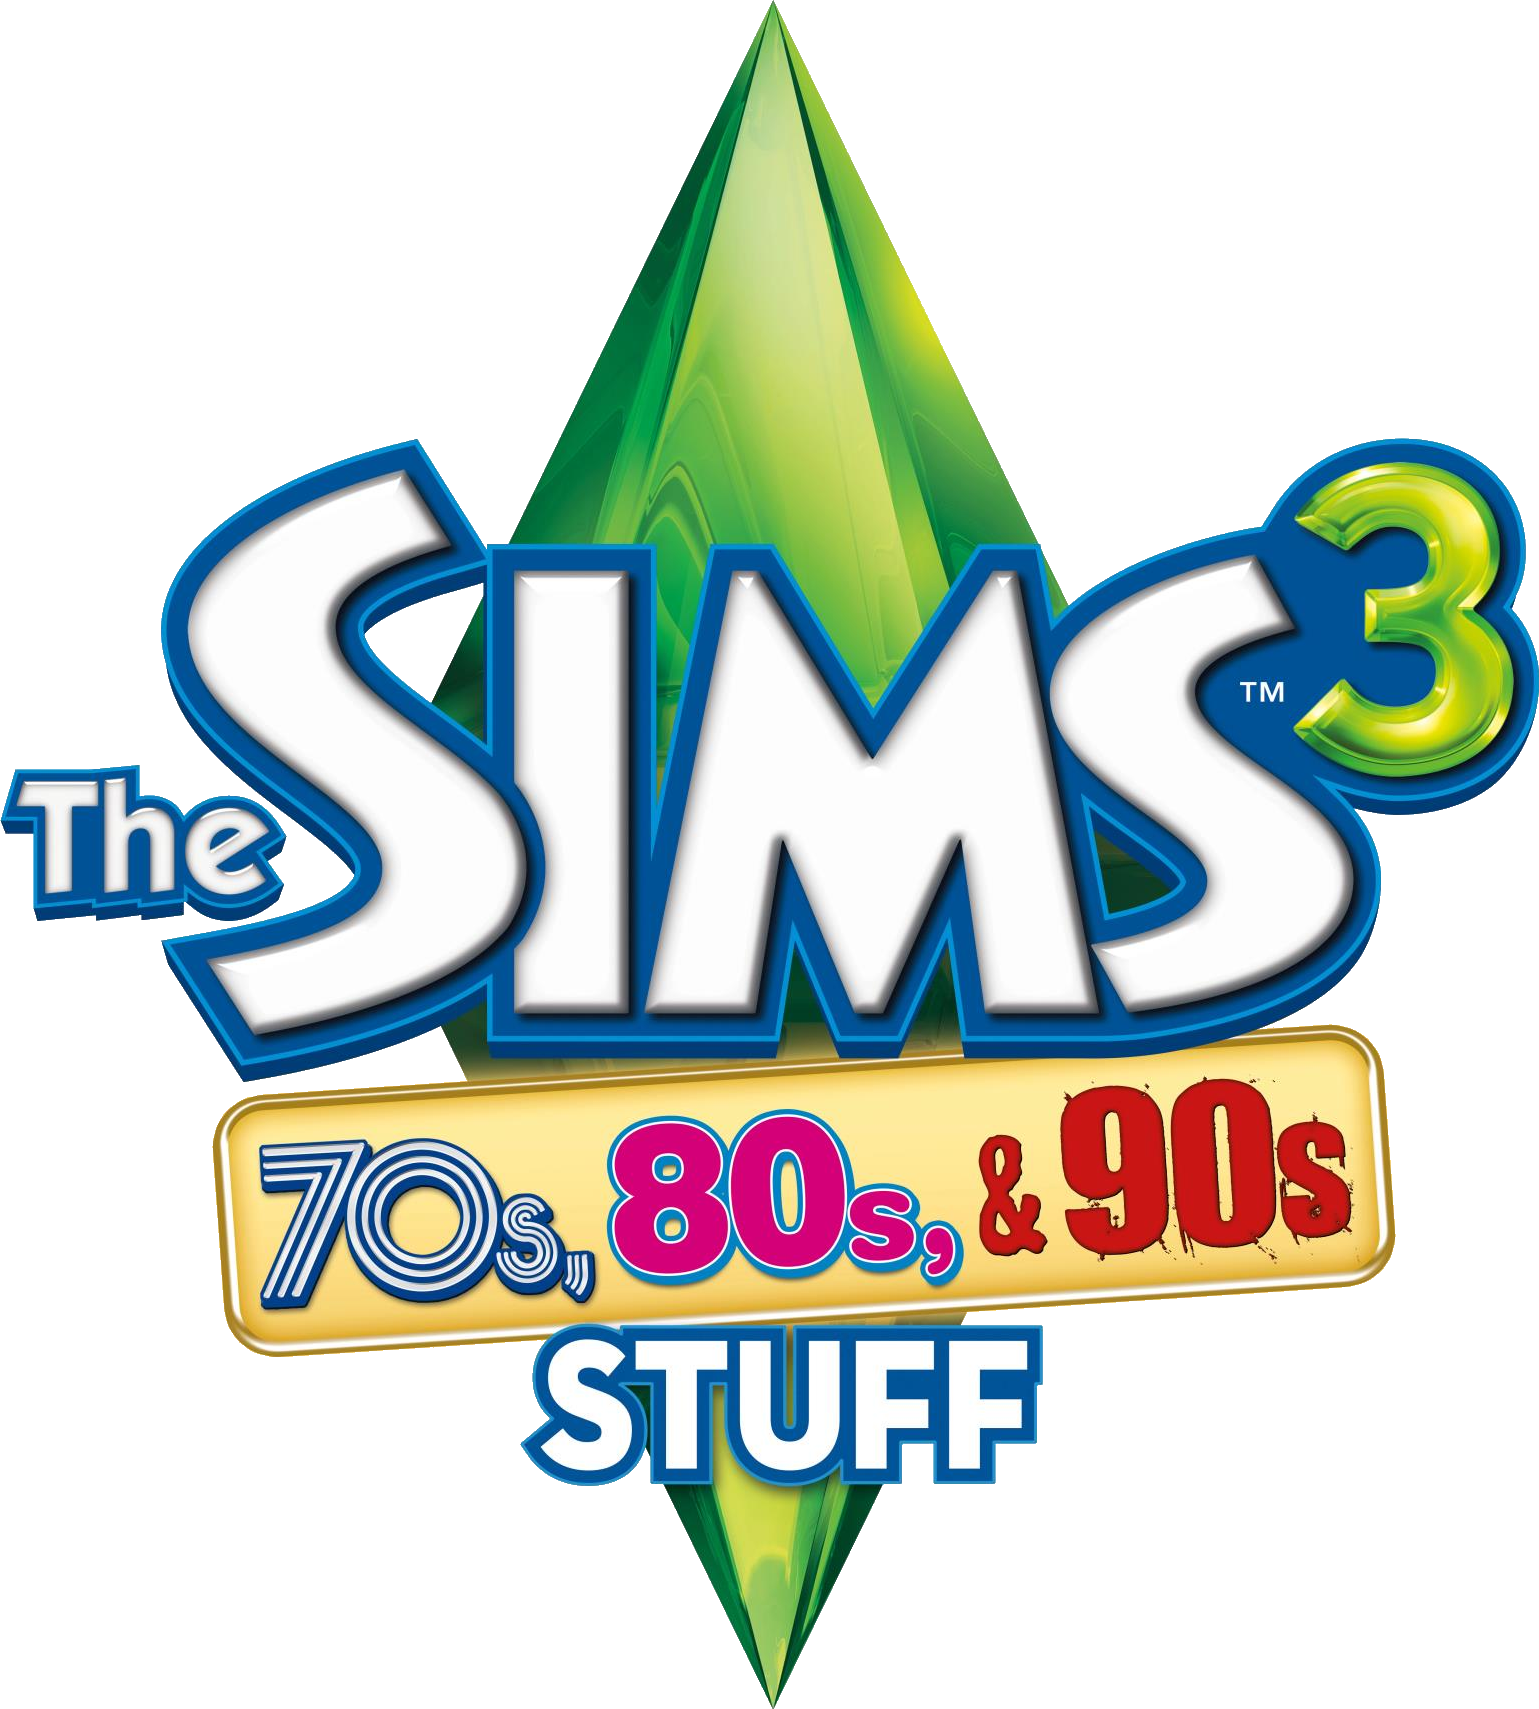 http://images4.wikia.nocookie.net/__cb20121011181915/sims/images/5/53/The_Sims_3_70s,_80s,_%26_90s_Stuff_Logo.png